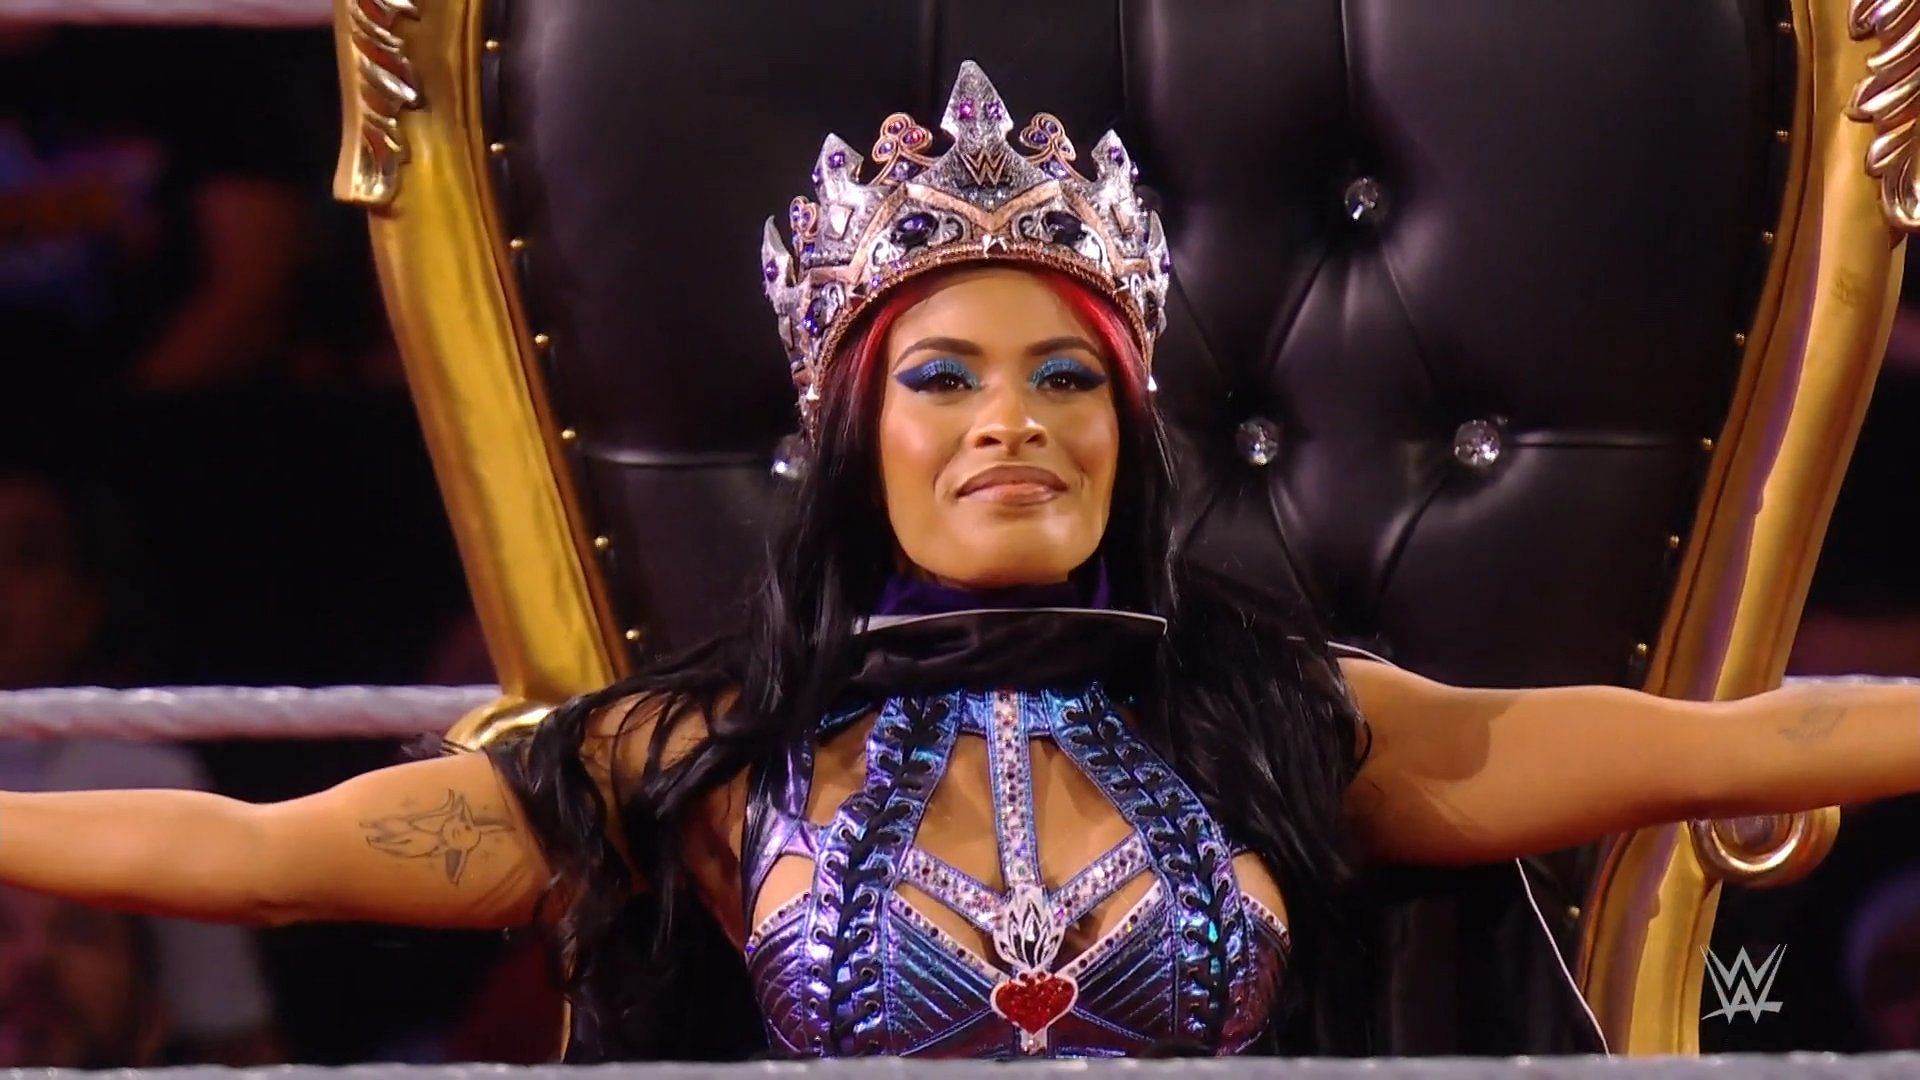 Zelina Vega was crowned as the 2021 Queen of the Ring